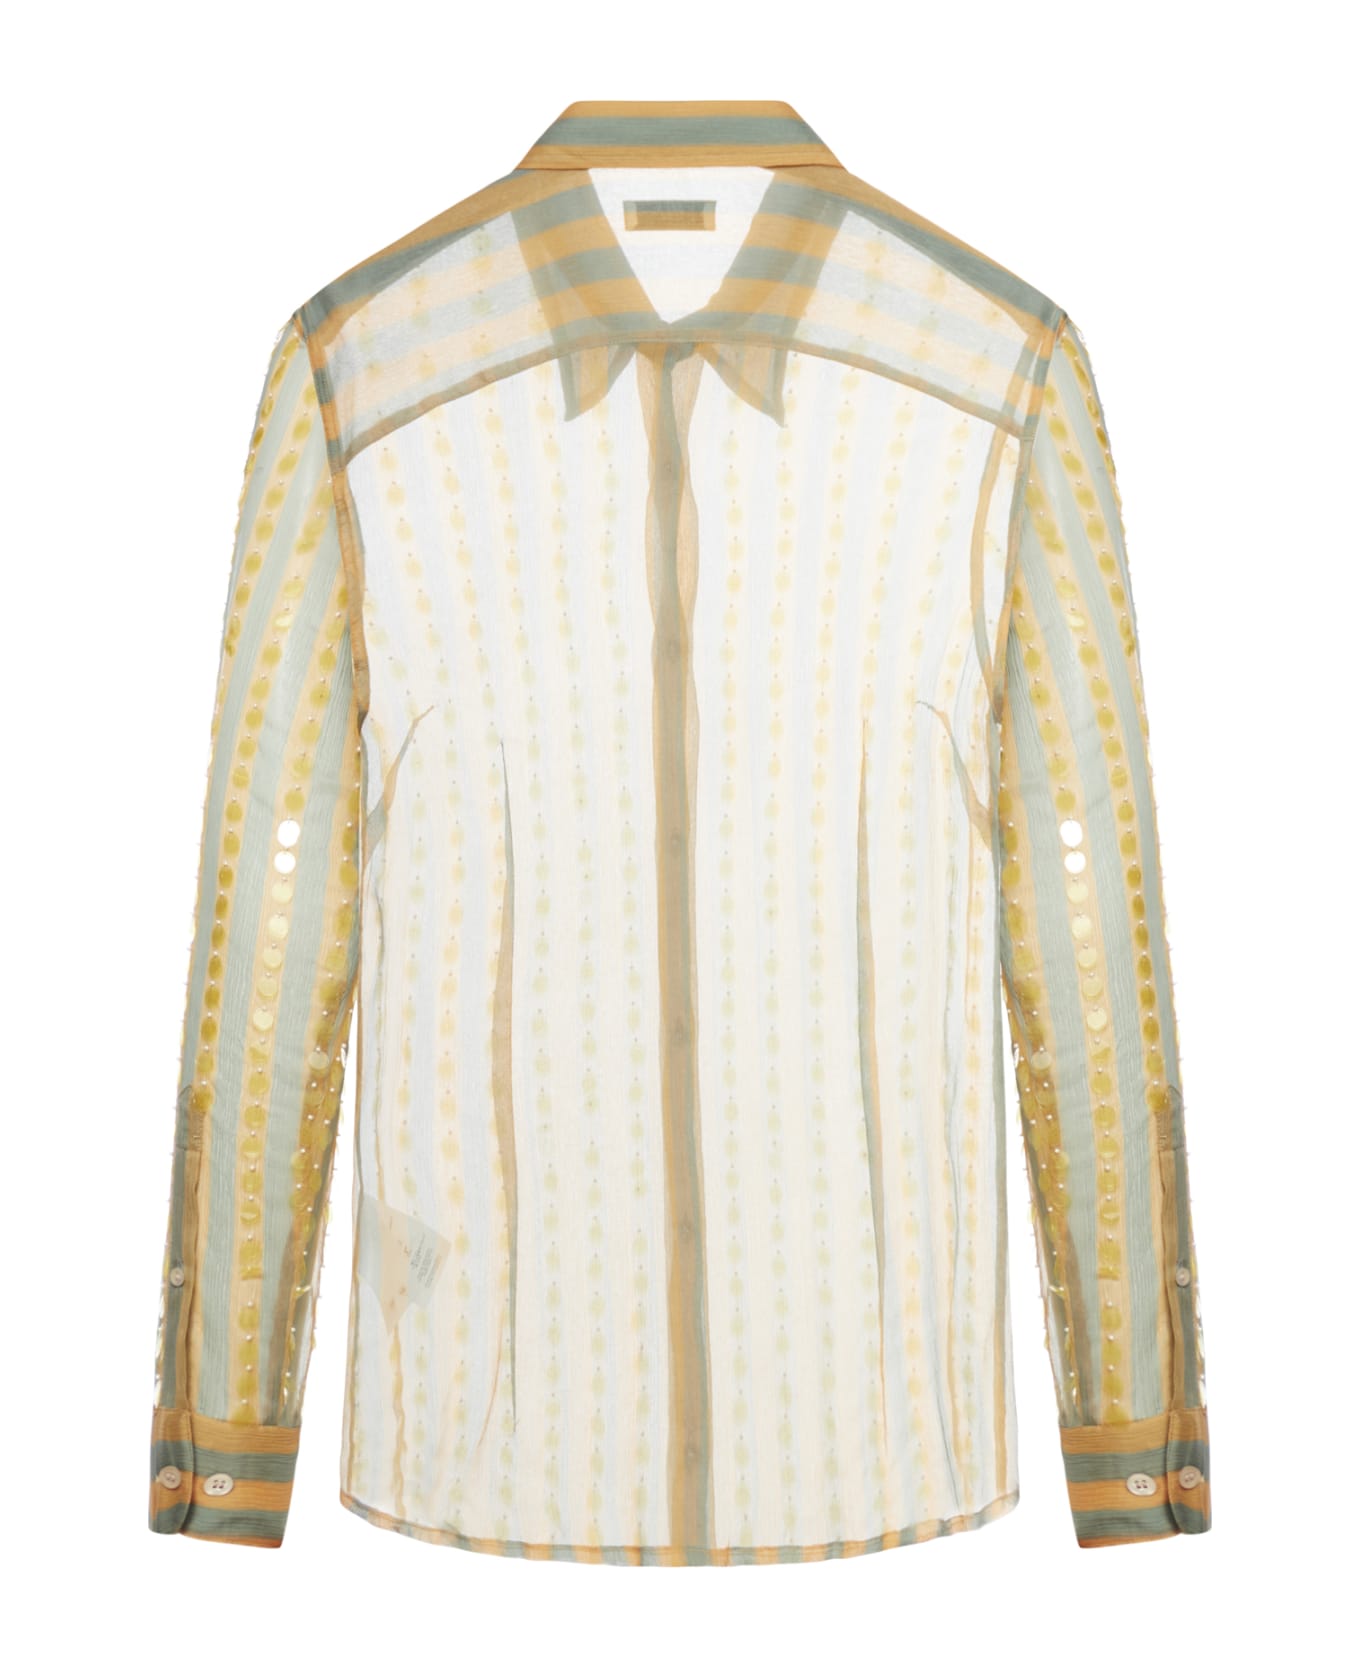 Dries Van Noten 00810-chowy Emb 8105 W.w.shirt Silk Mousseline Printed With Bicolor Stripes - Peach